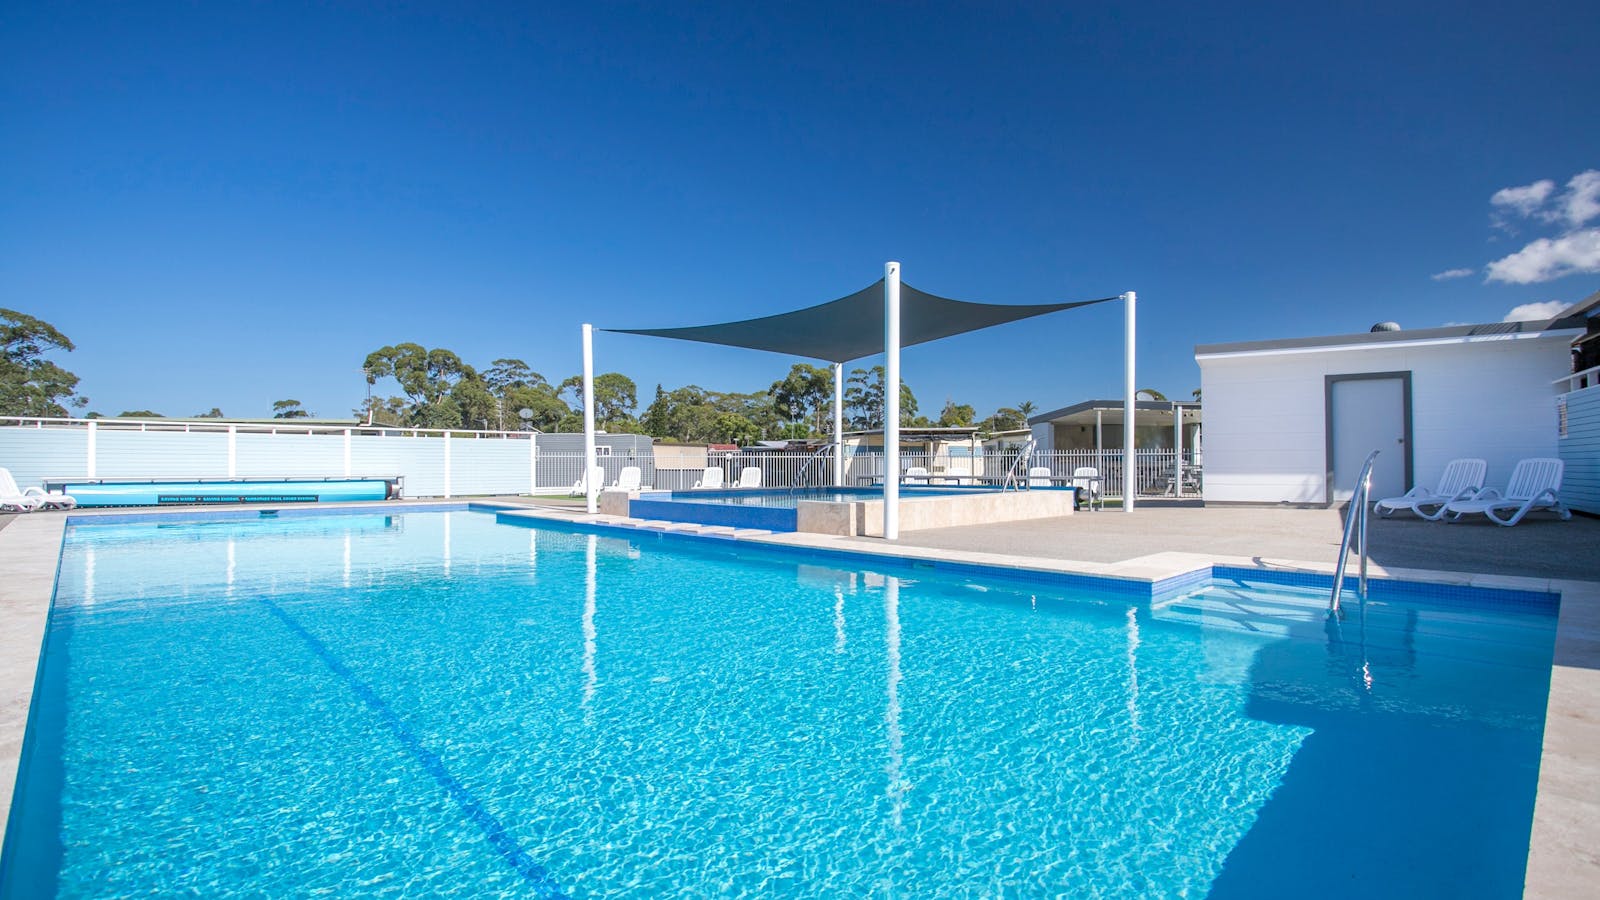 Heated outdoor swimming pool